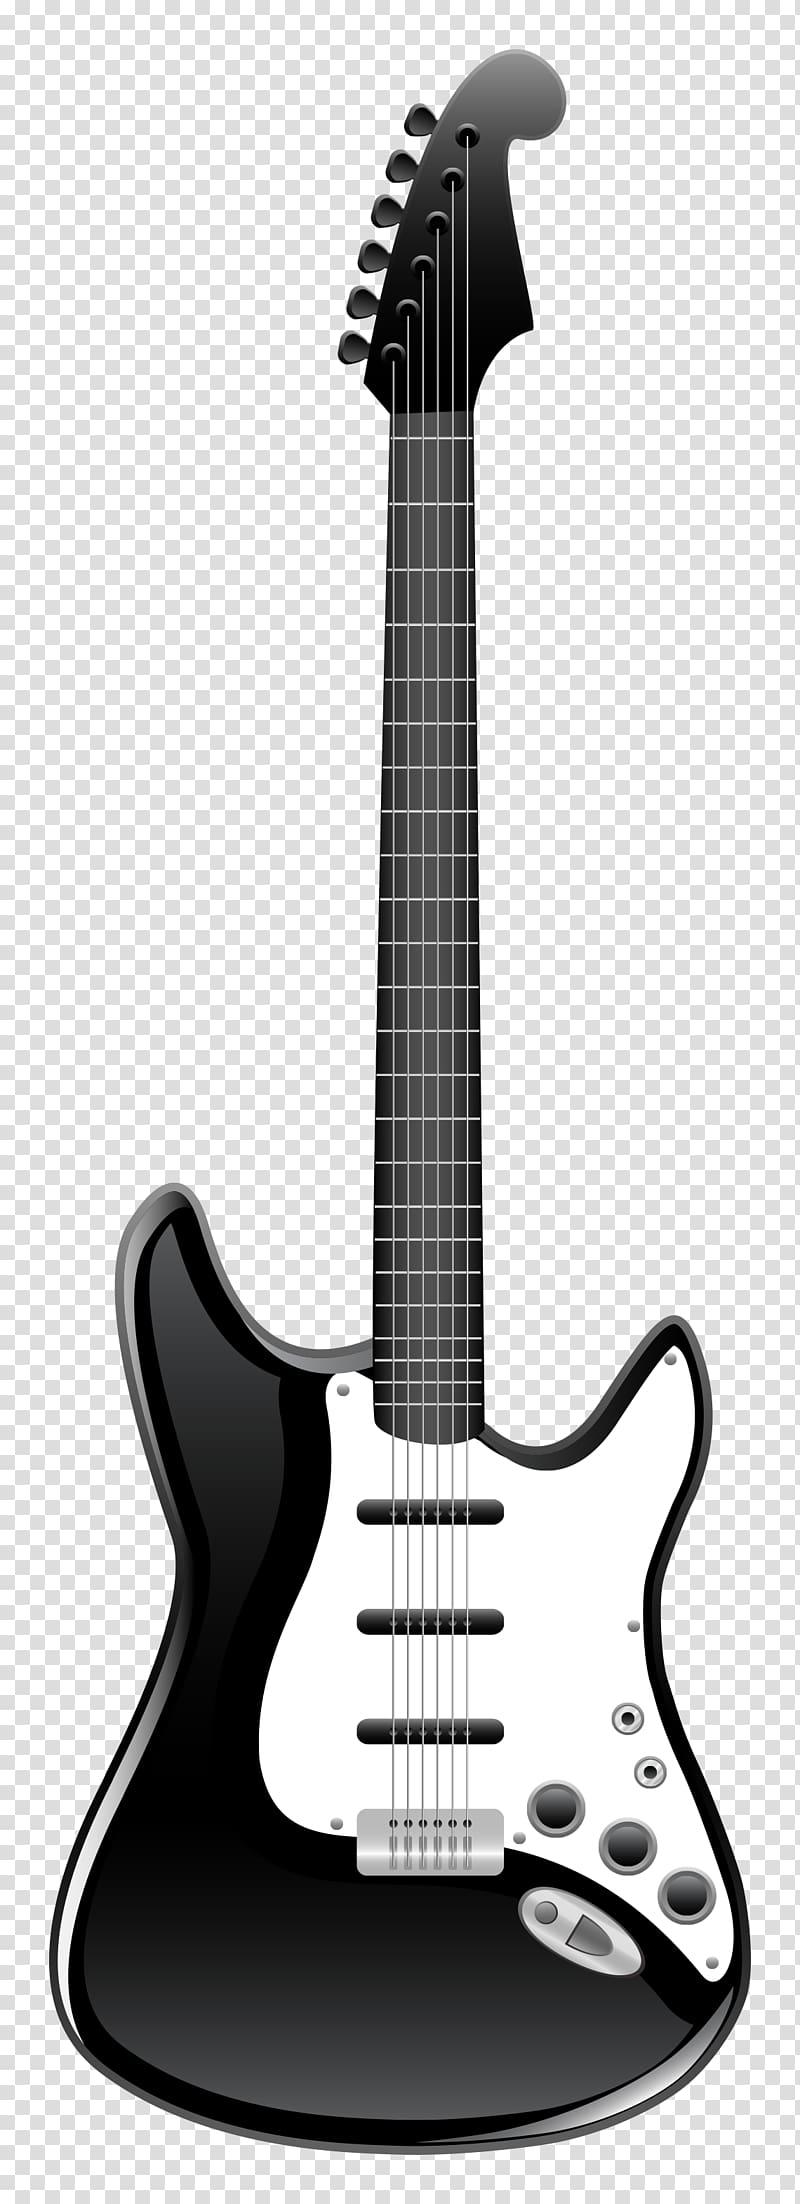 Acoustic guitar Electric guitar Black and white , musical instruments transparent background PNG clipart